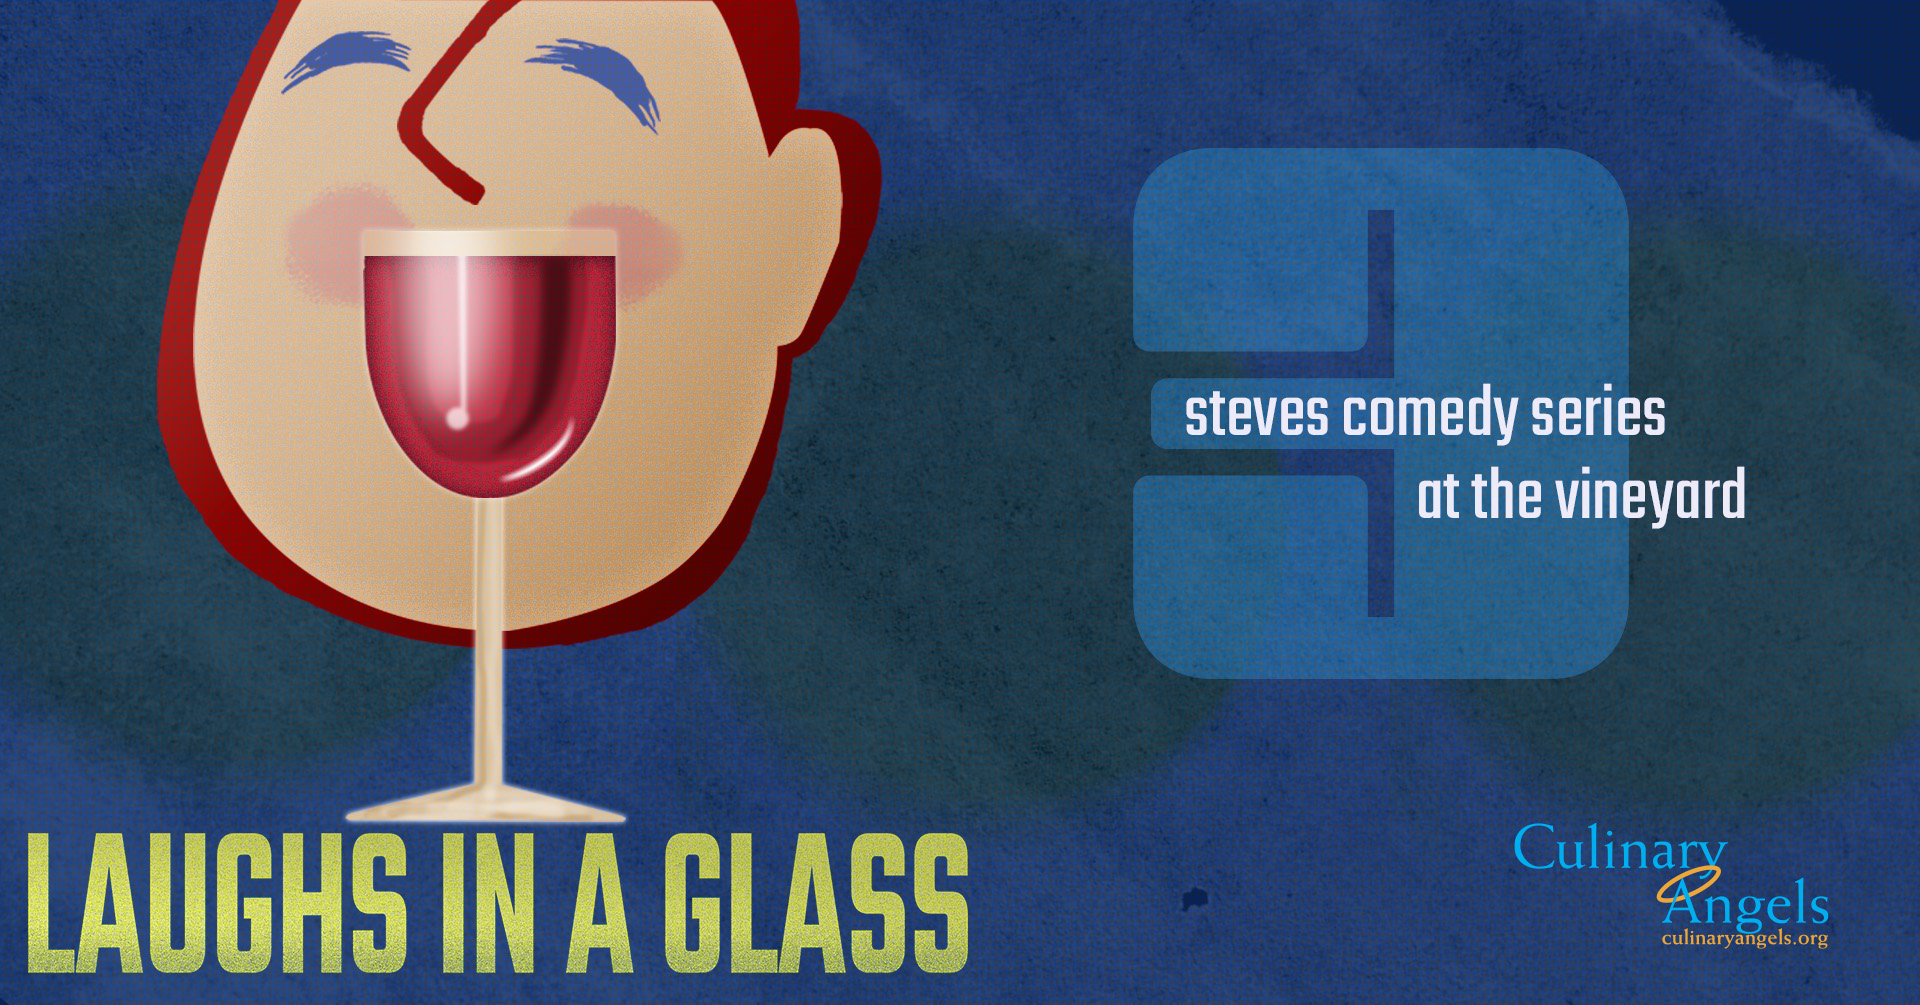 Laughs in a Glass 3 Steves Comedy Series at the Vineyard